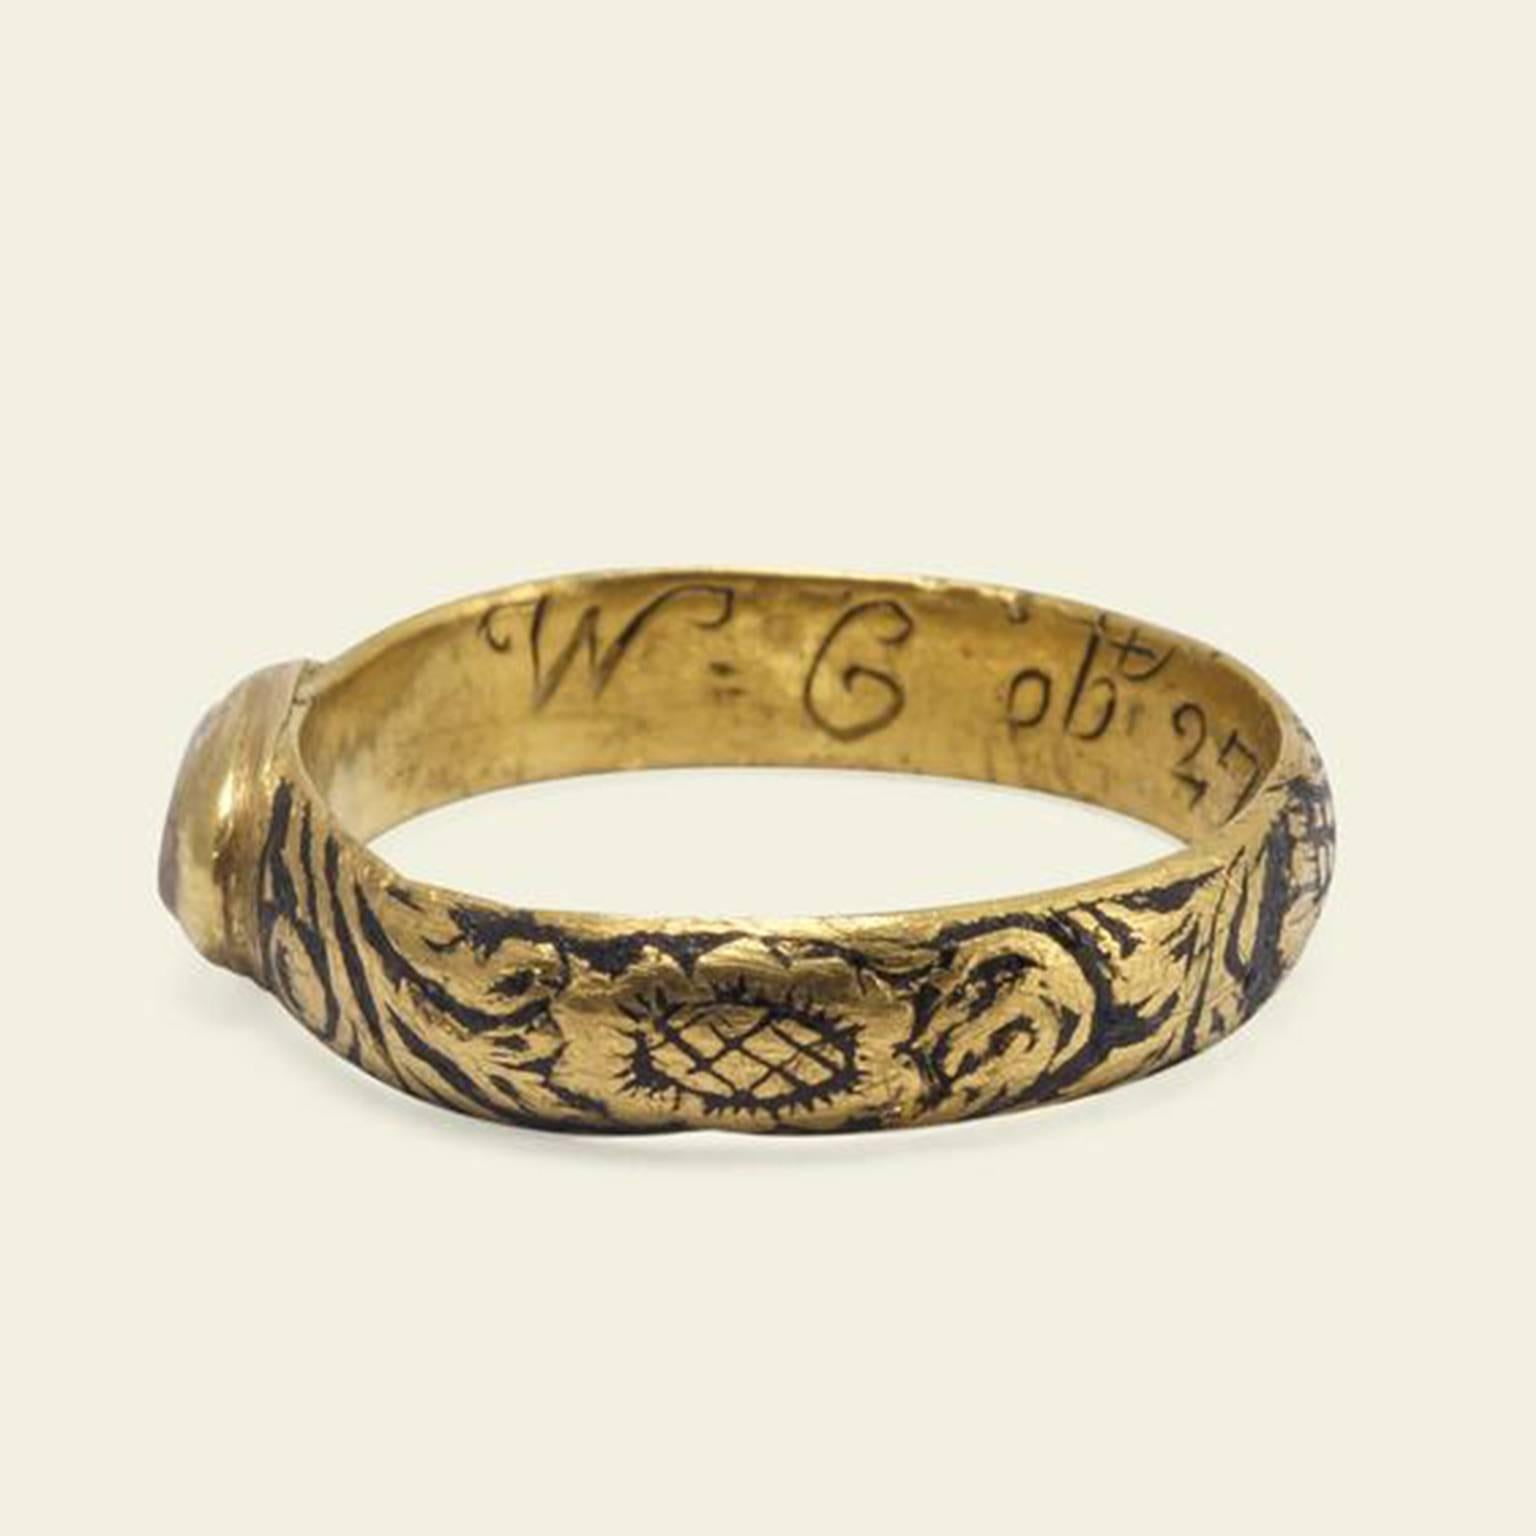 This spectacular and rare mourning ring was made in the first years of what is now known as the Georgian era. The head of the ring features a flat cut rock crystal with an oval collet. The crystal houses a well-preserved white enamel skull and